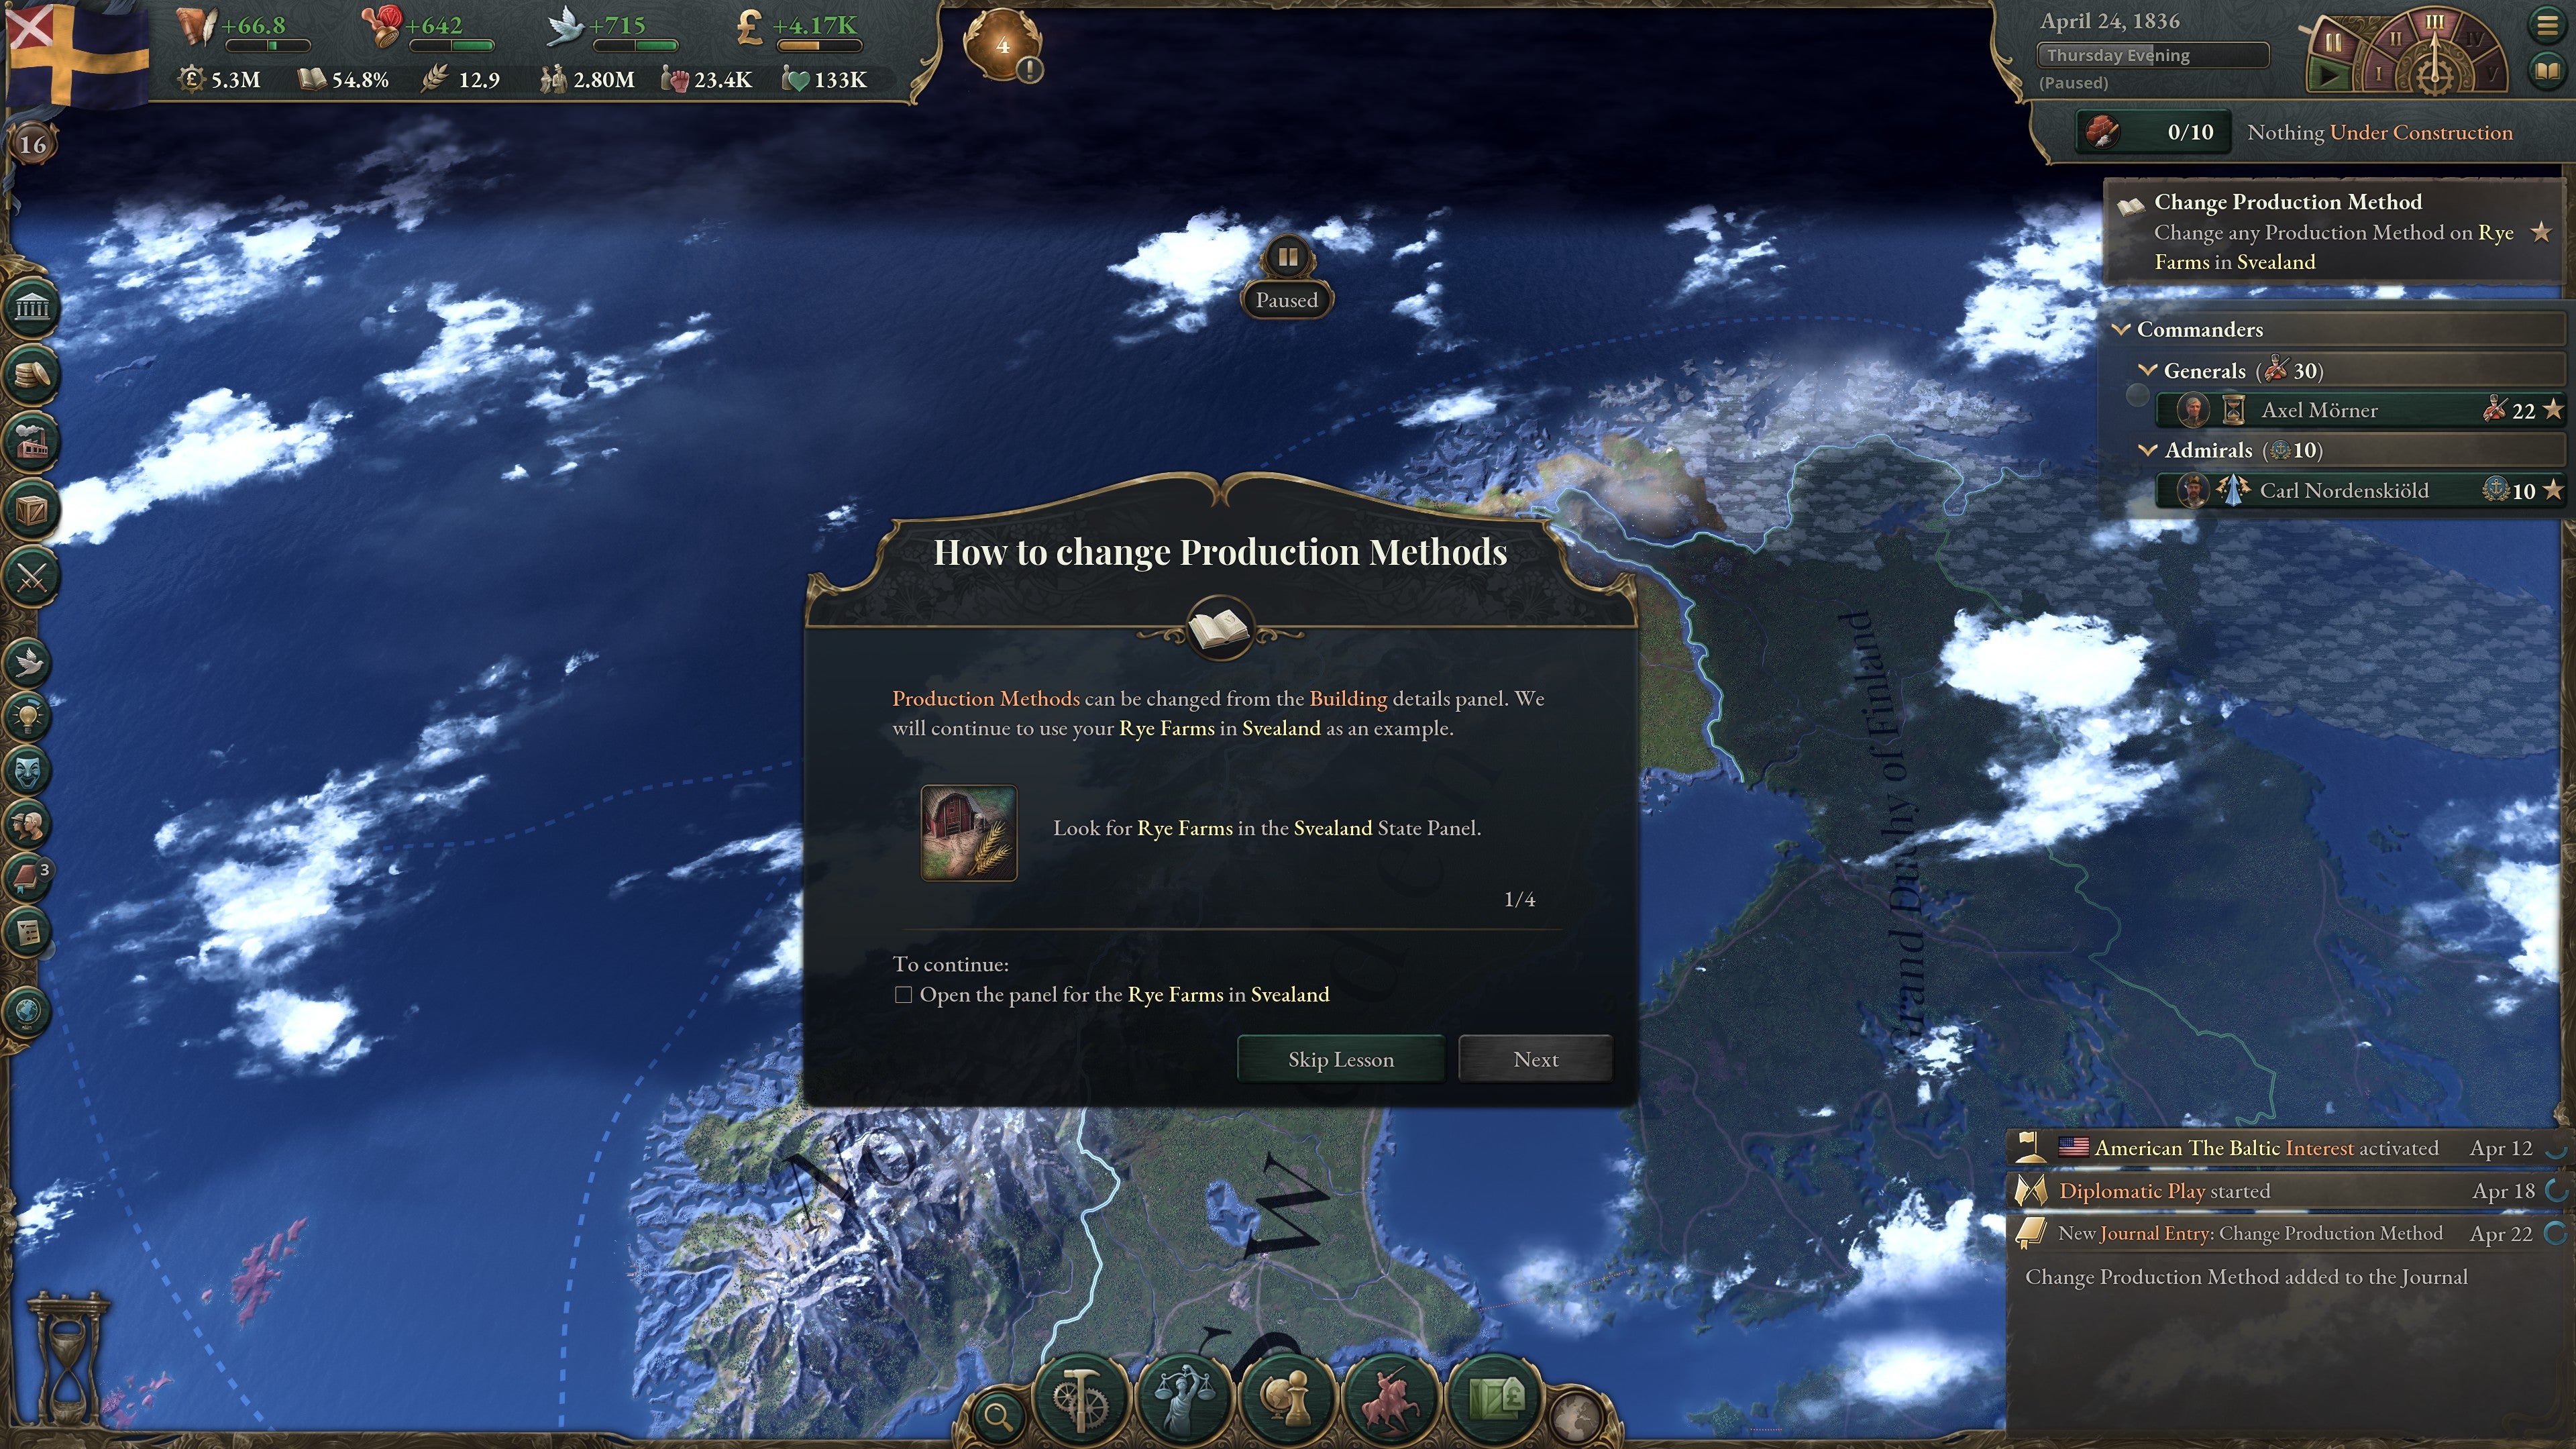 Victoria 3 review - A tooltip explaining how to change Production Methods